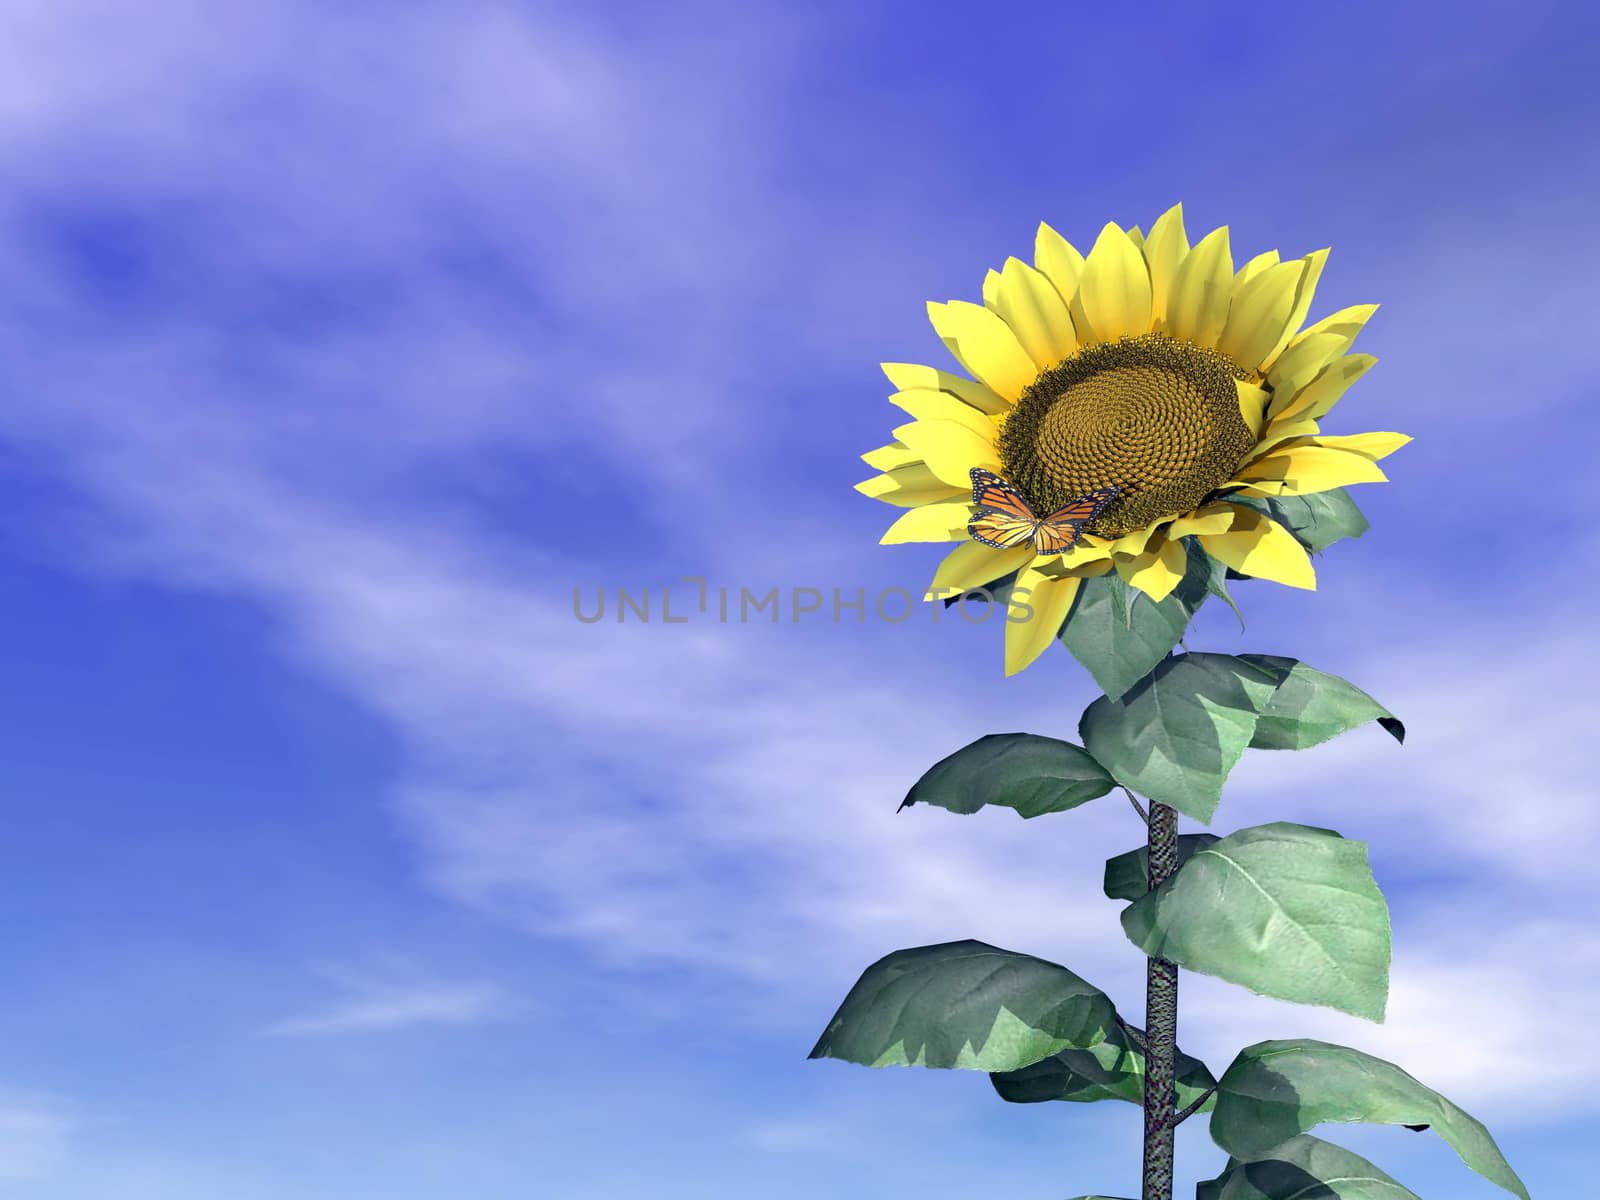 Close up on one sunflower standing in blue cloudy sky